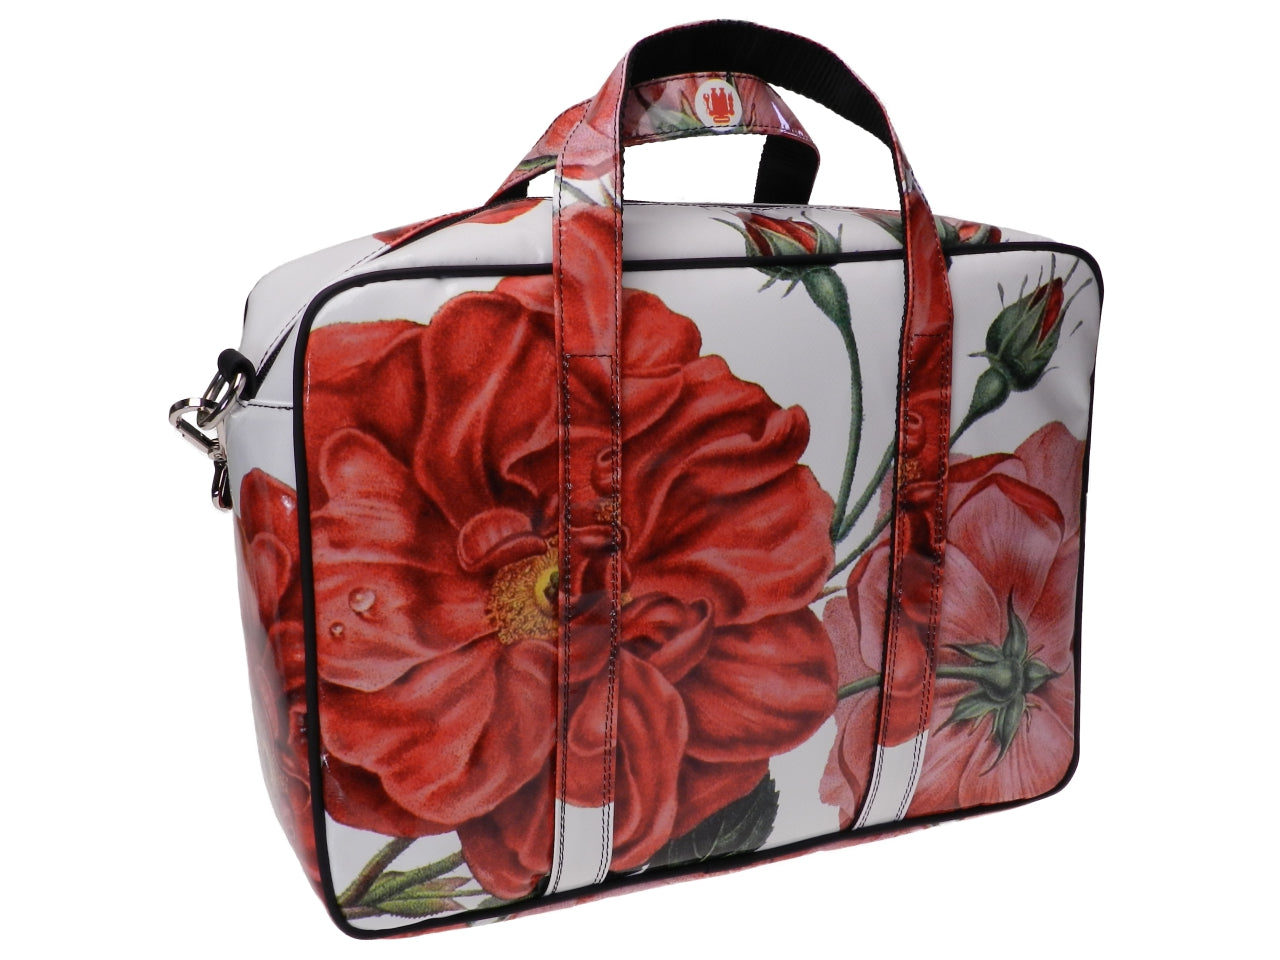 WOMAN BRIEFCASE OFF WHITE COLOUR FLORAL FANTASY. KART MODEL MADE OF LORRY TARPAULIN. - Limited Edition Paul Meccanico